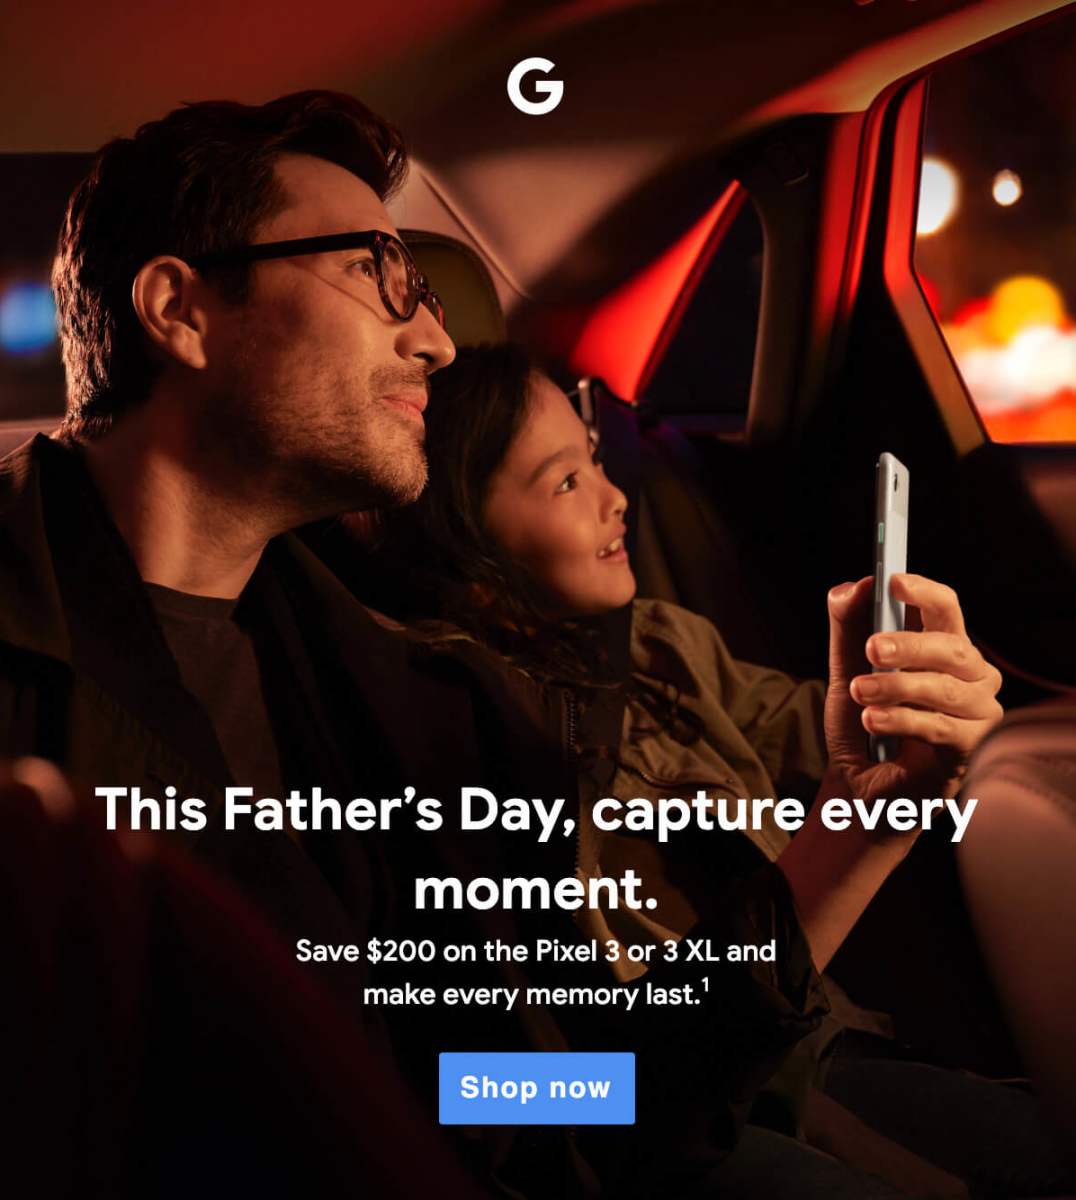 An advertisment showing a father and his daughter taking a selfie with a smartphone